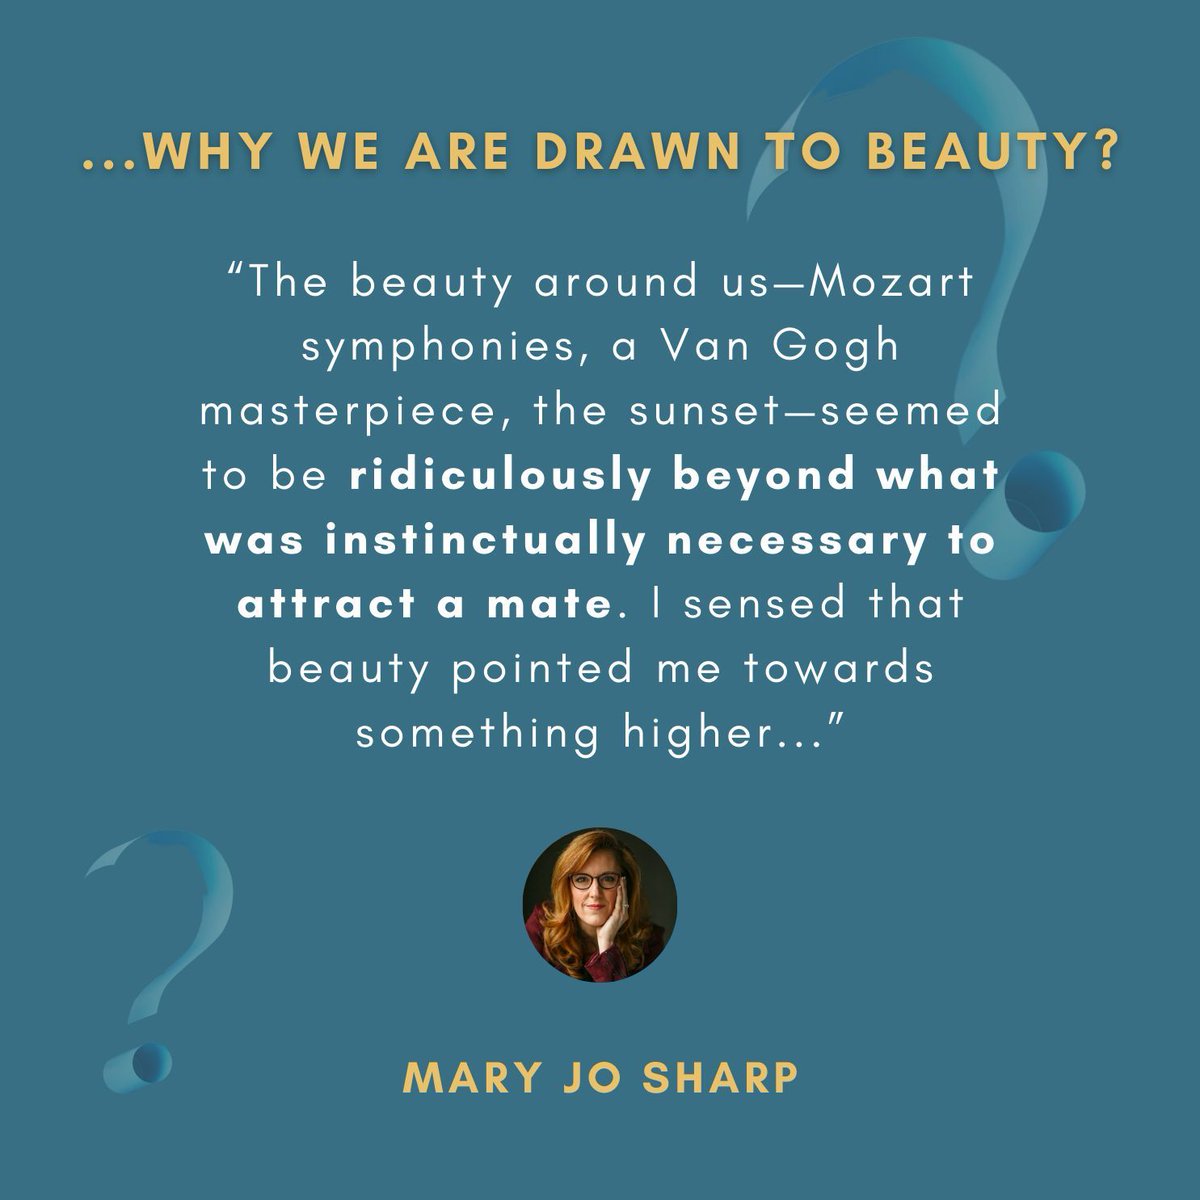 Beauty is a clue that we are far more than just collections of atoms and particles ... in 'Have You Ever Wondered?', the new book from @solascpc & @10ofThose, we explore where these clues point. A great gift for a friend to start a conversation: buff.ly/3UpP7sx